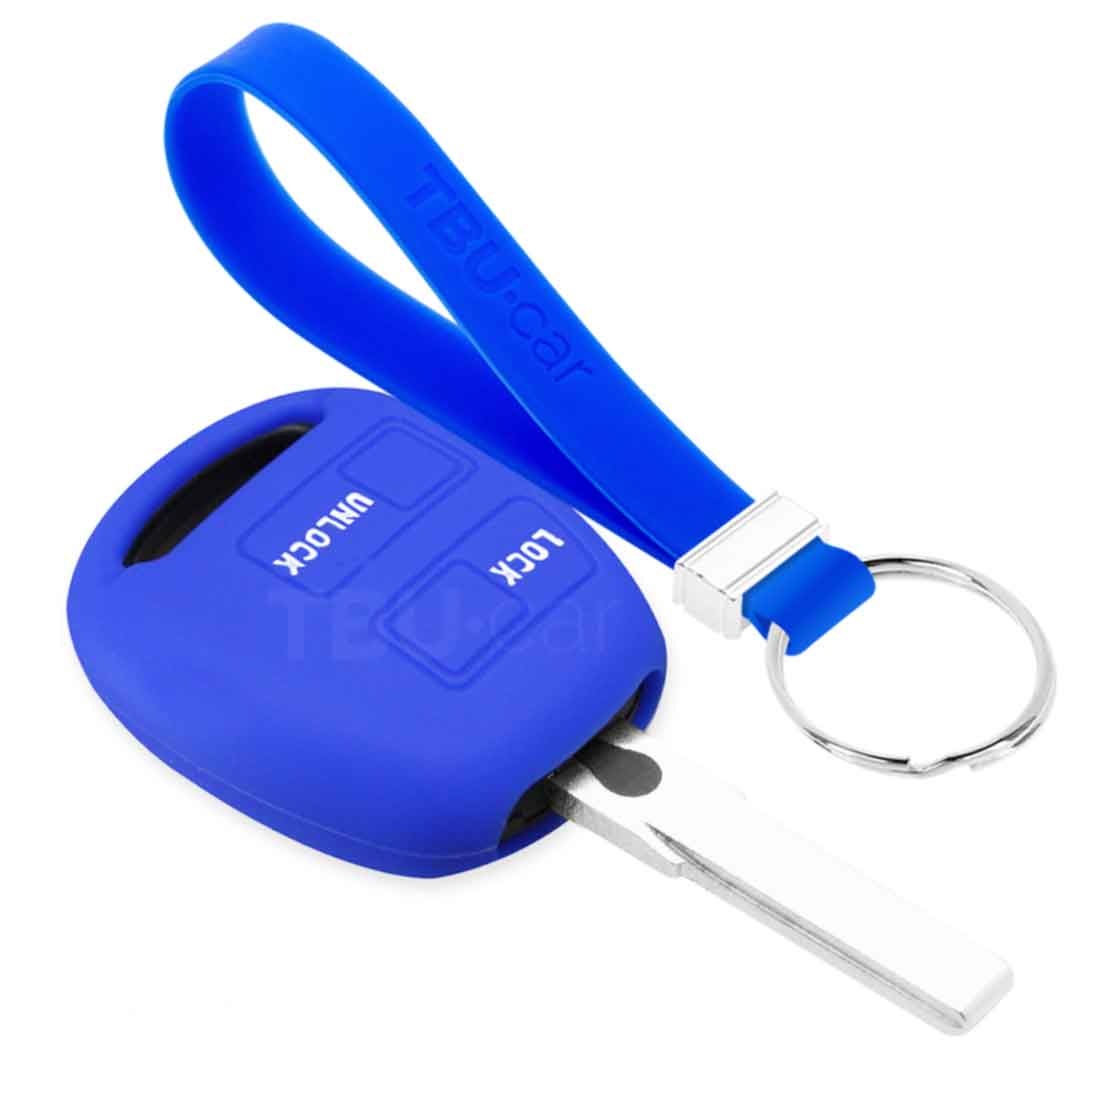 TBU car TBU car Car key cover compatible with Lexus - Silicone Protective Remote Key Shell - FOB Case Cover - Blue